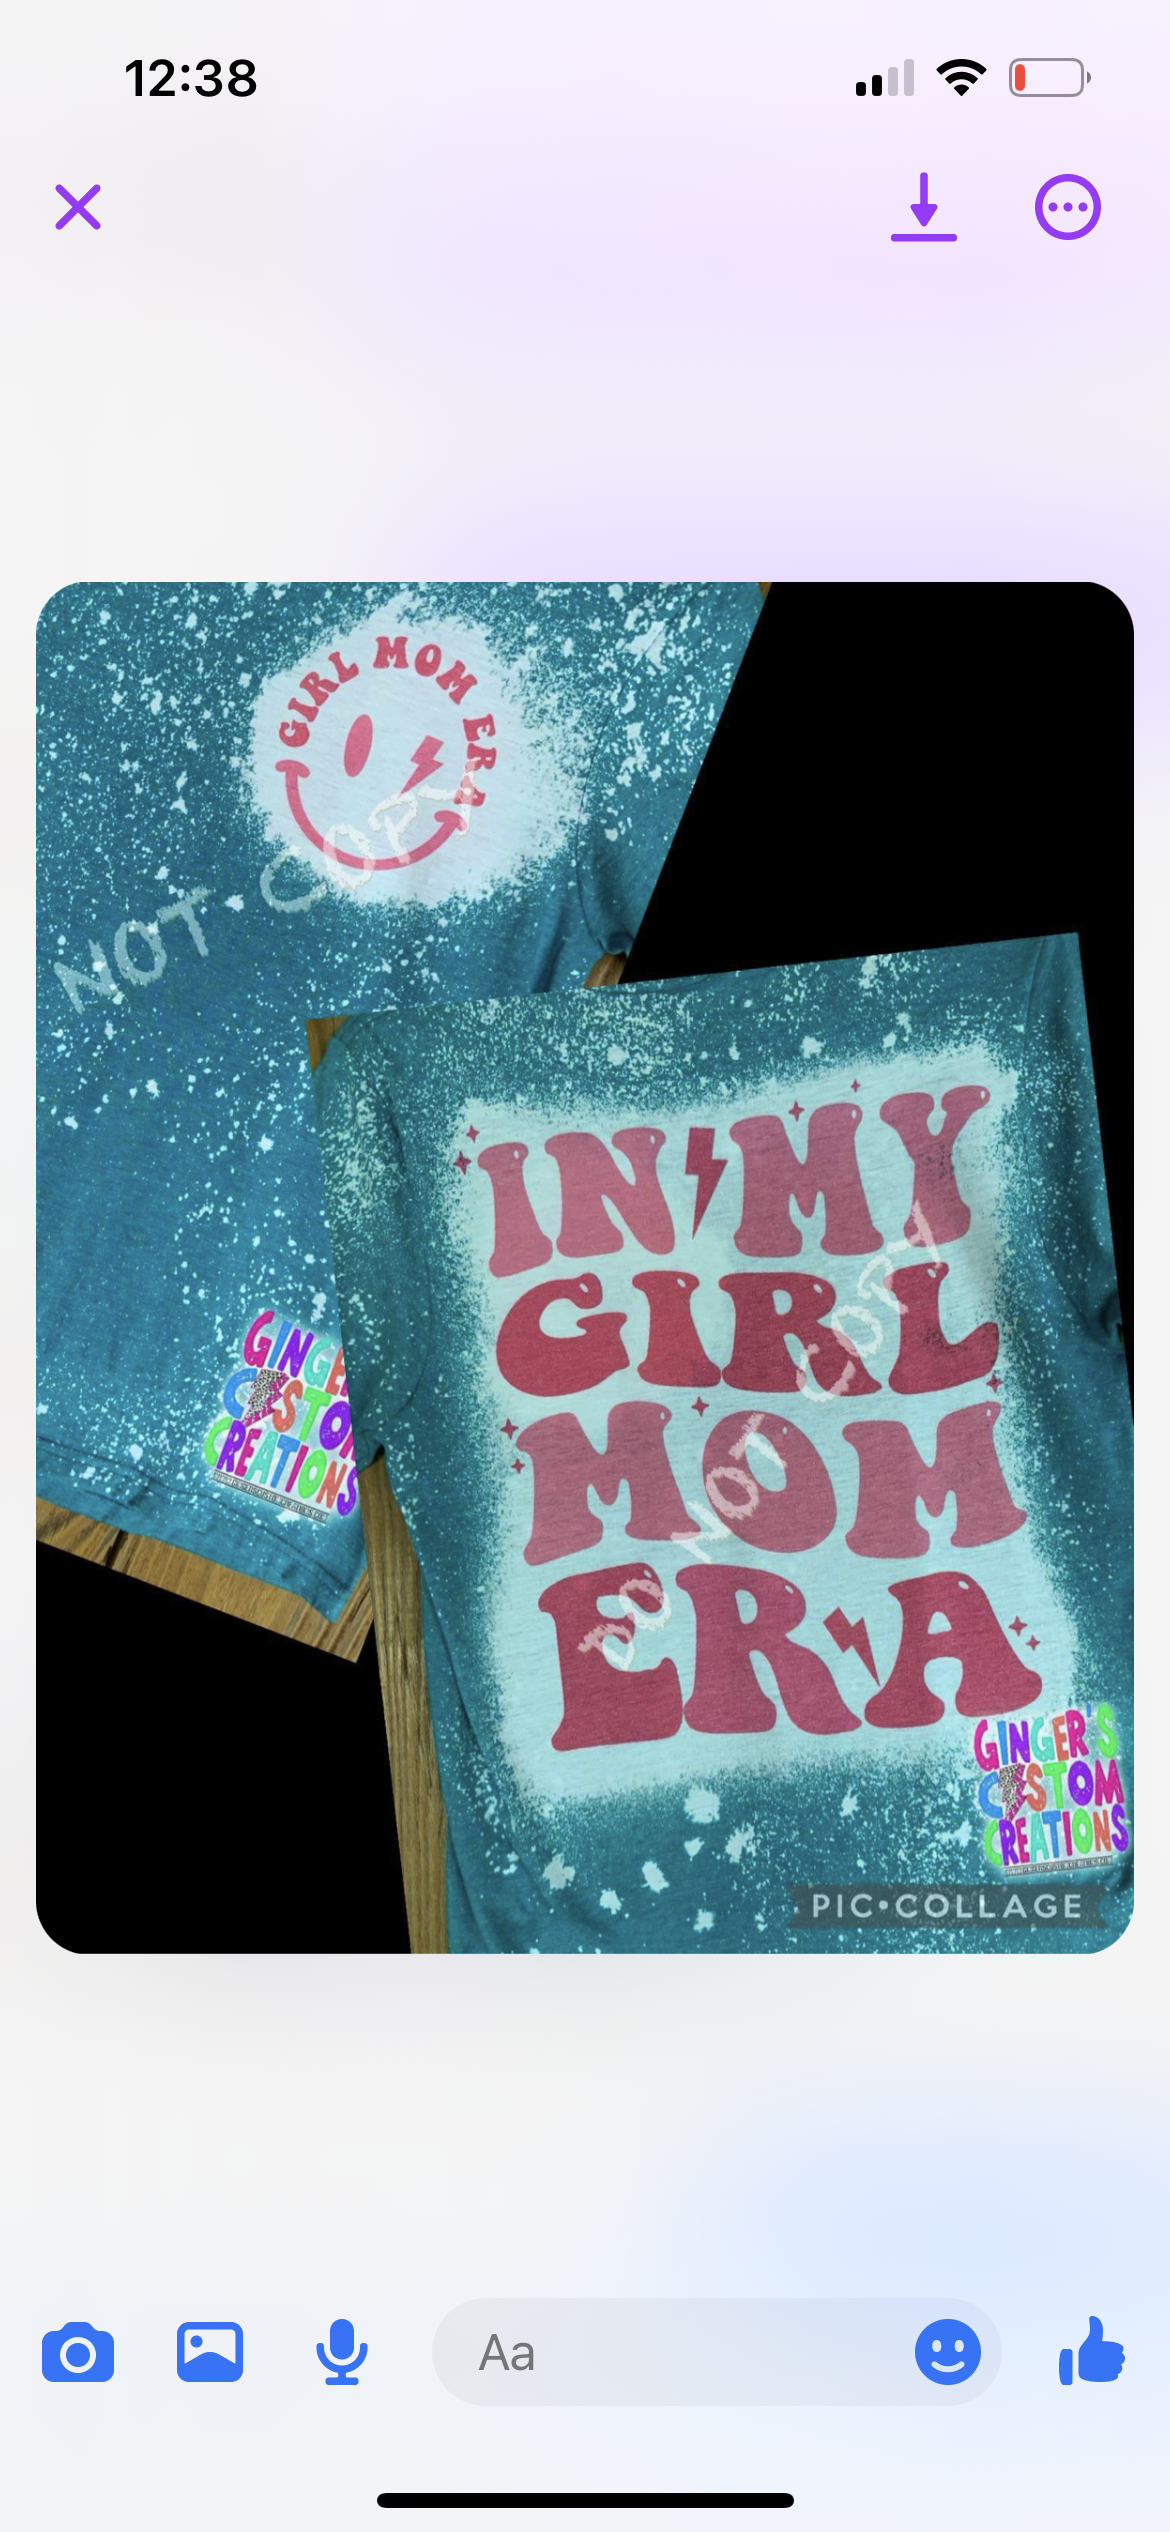 In my girl mom era blue front&back   - BLEACHED TSHIRT